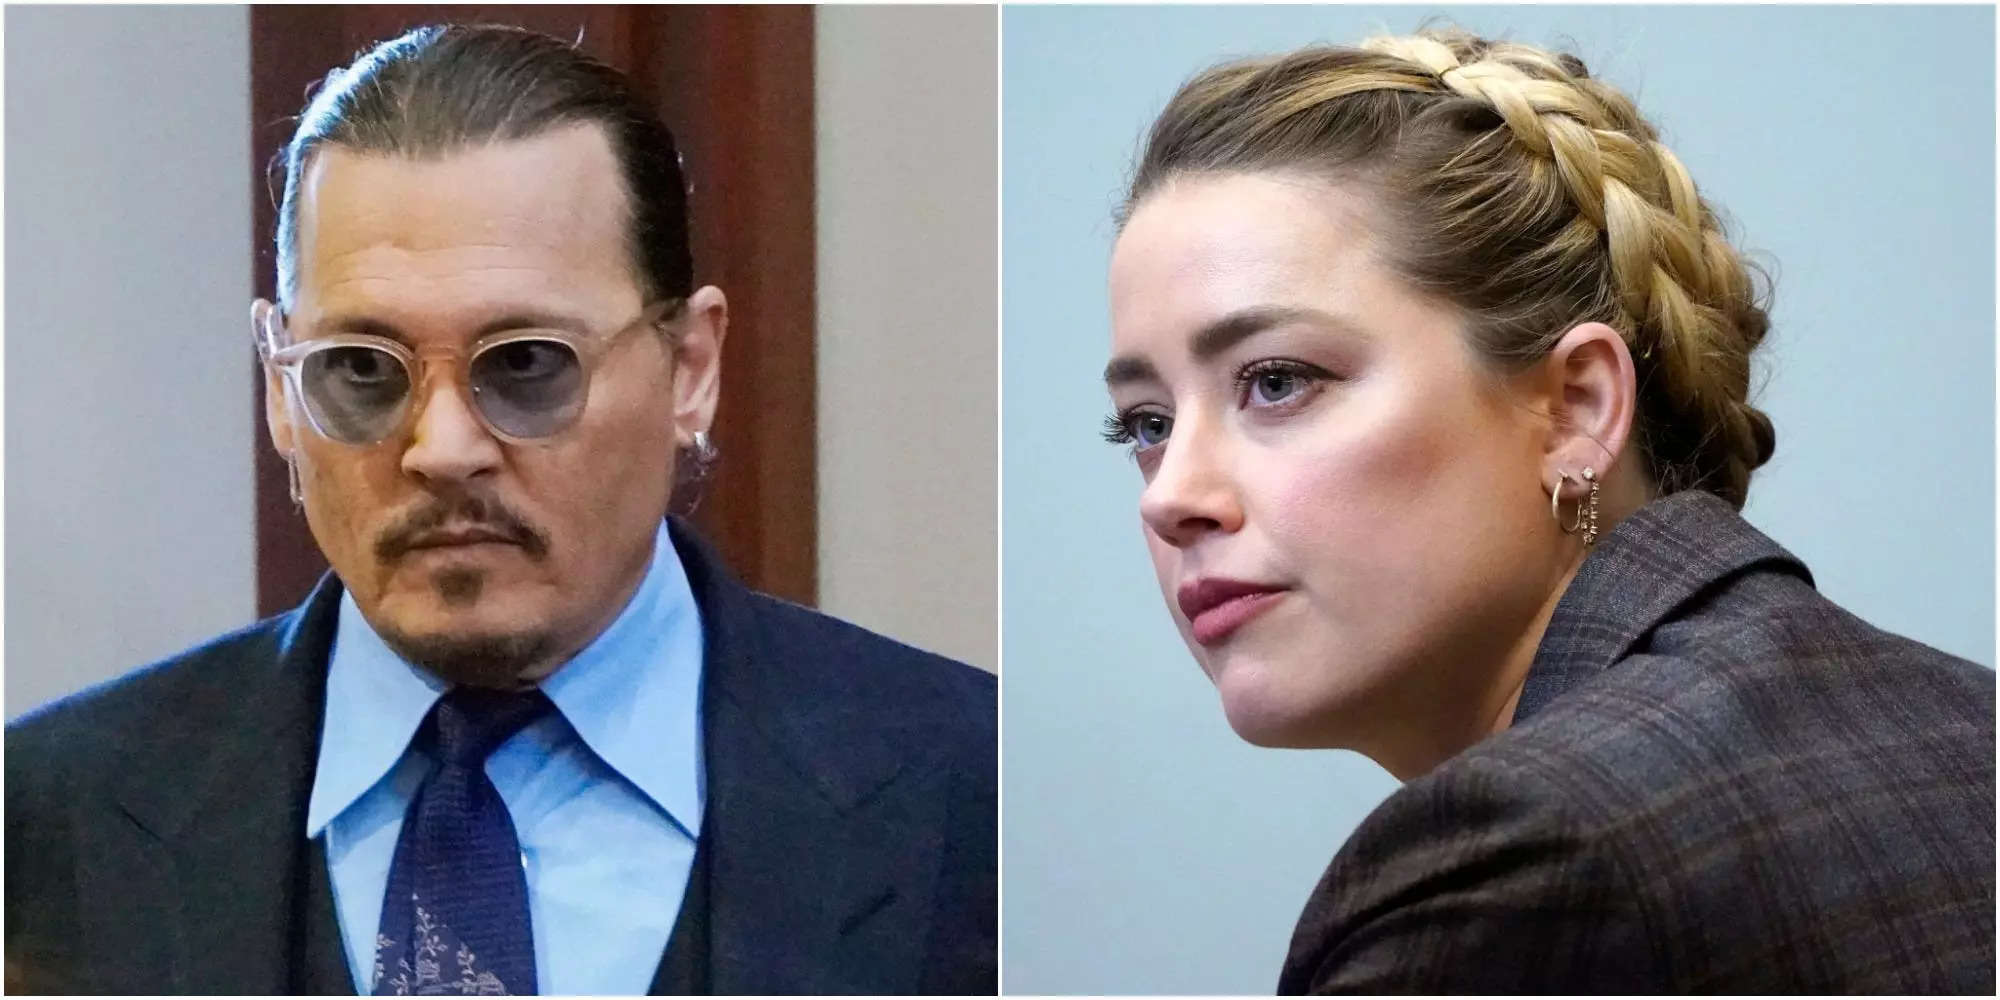 Here's how to watch the Johnny Depp, Amber Heard trial | Business ...